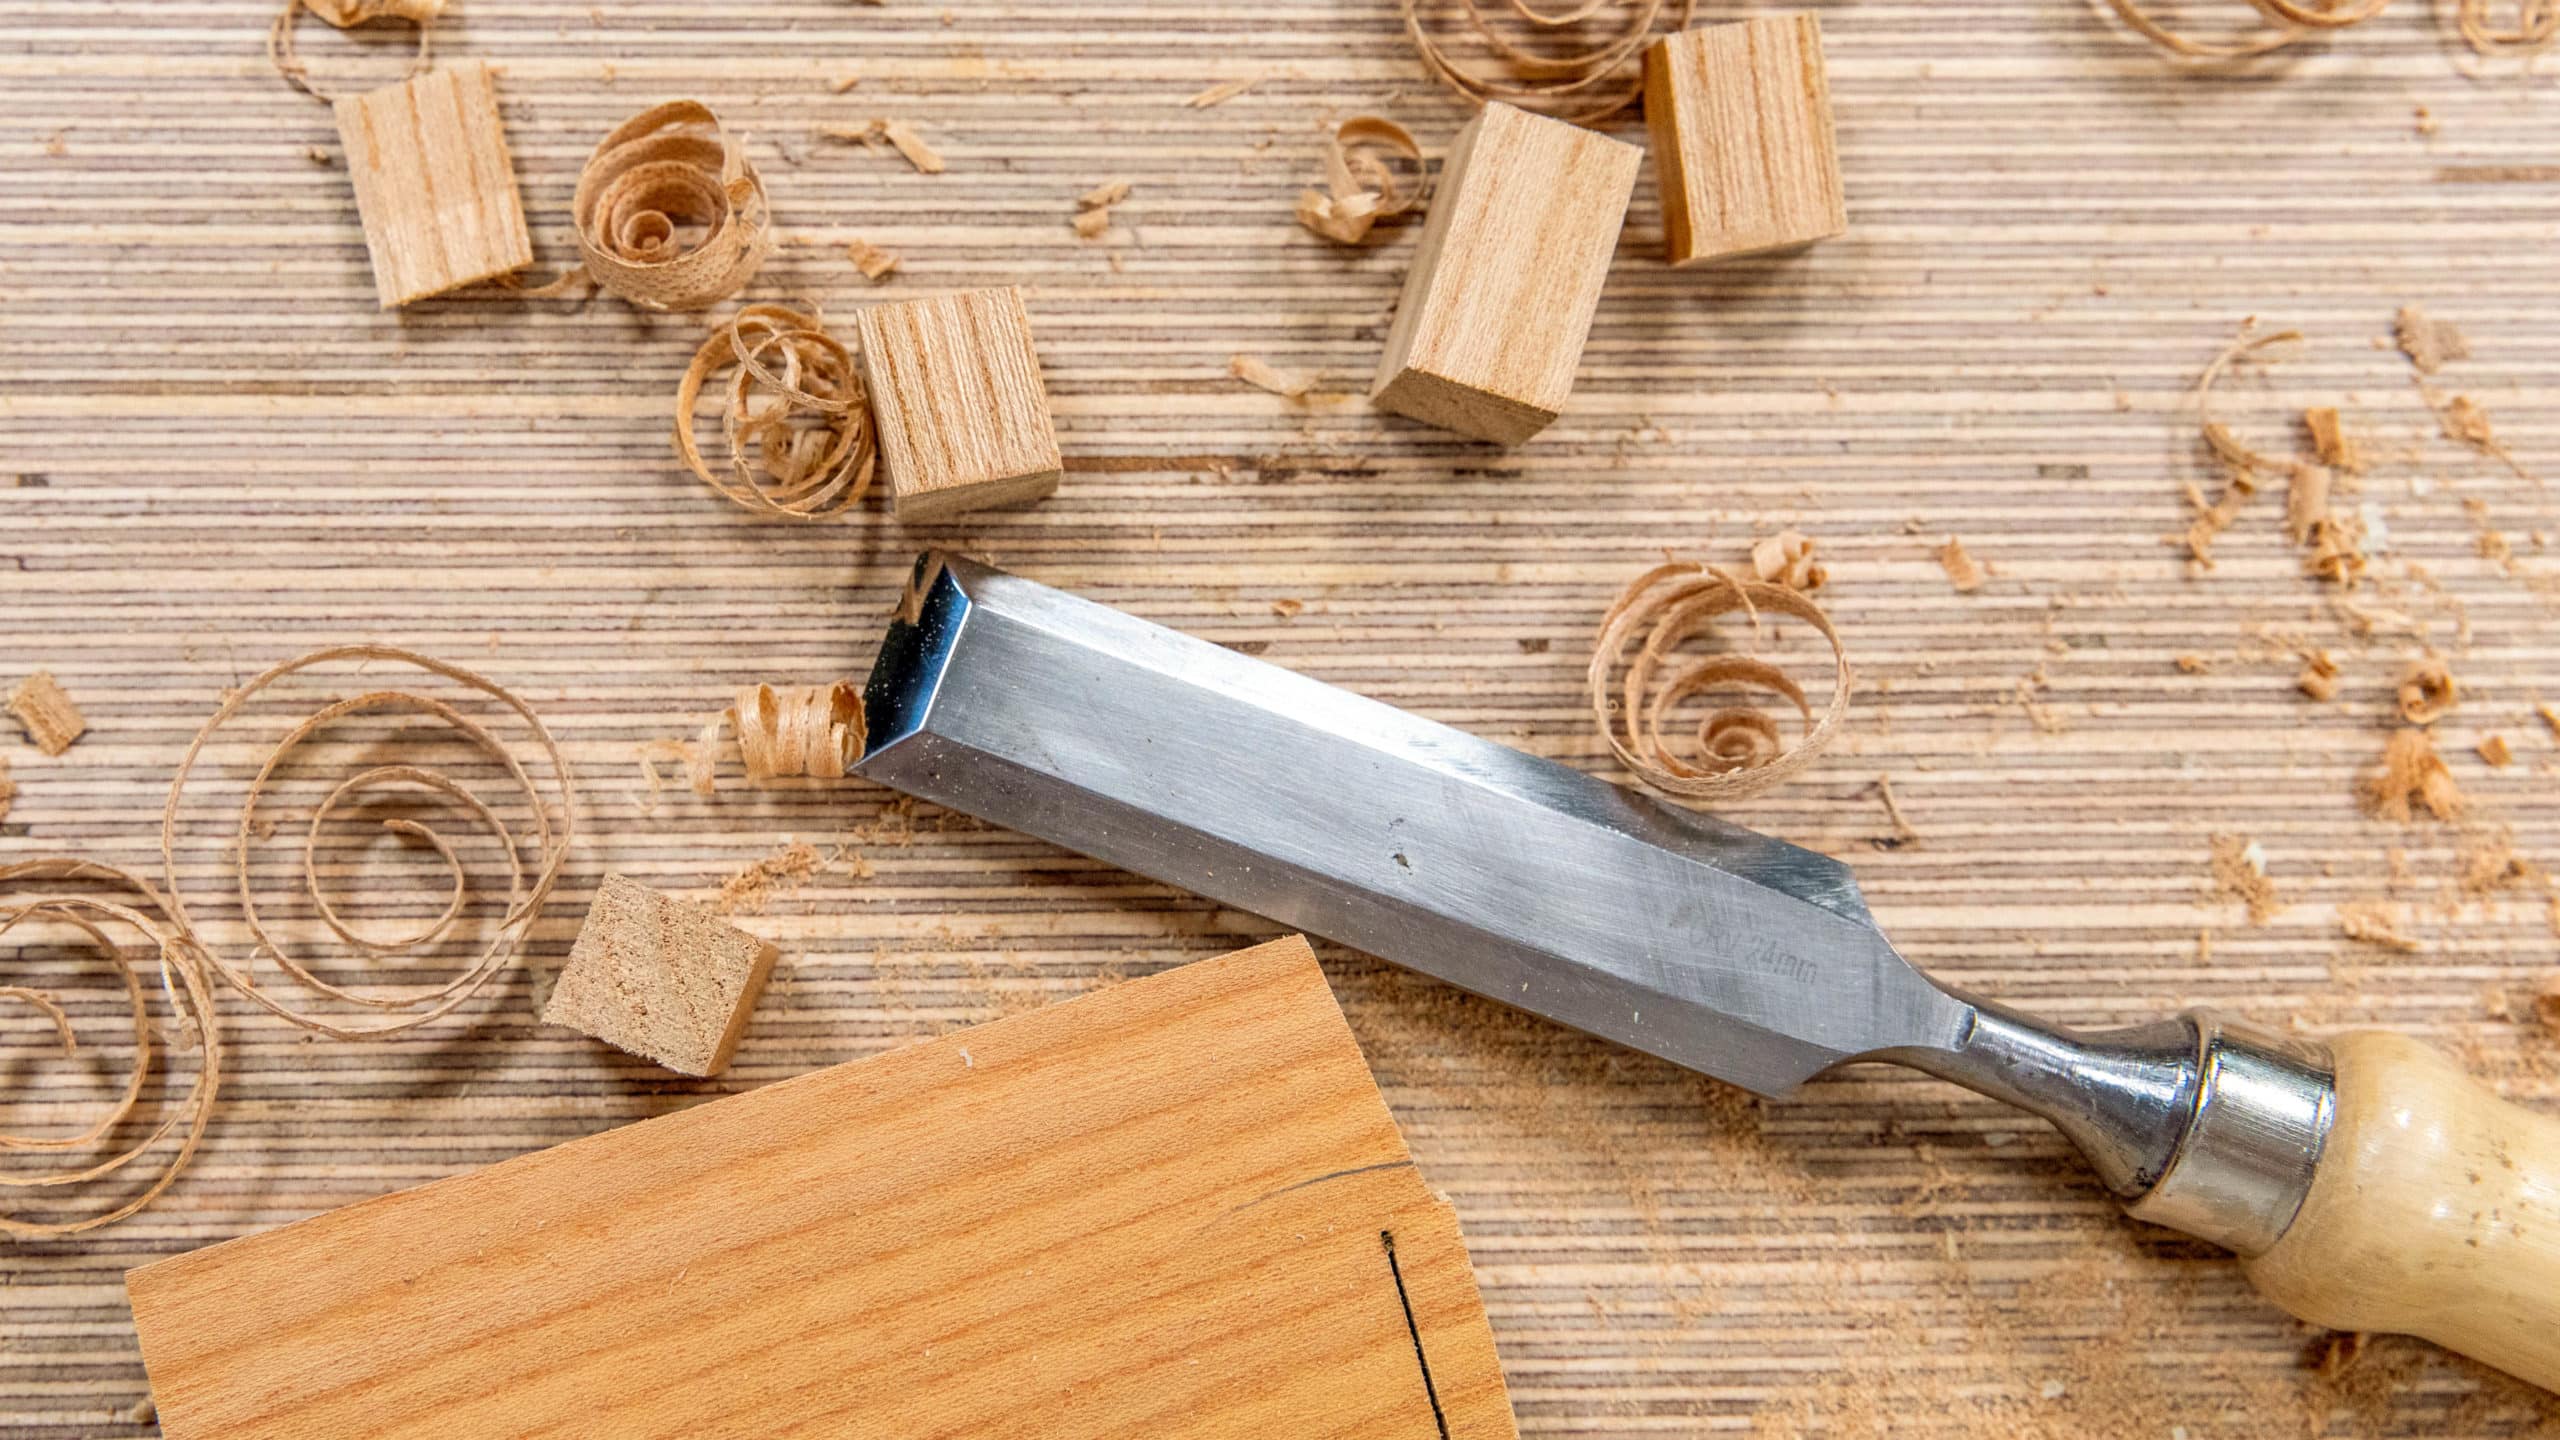 https://commonwoodworking.com/wp-content/uploads/2019/12/Chisel-16x9-2-scaled.jpg